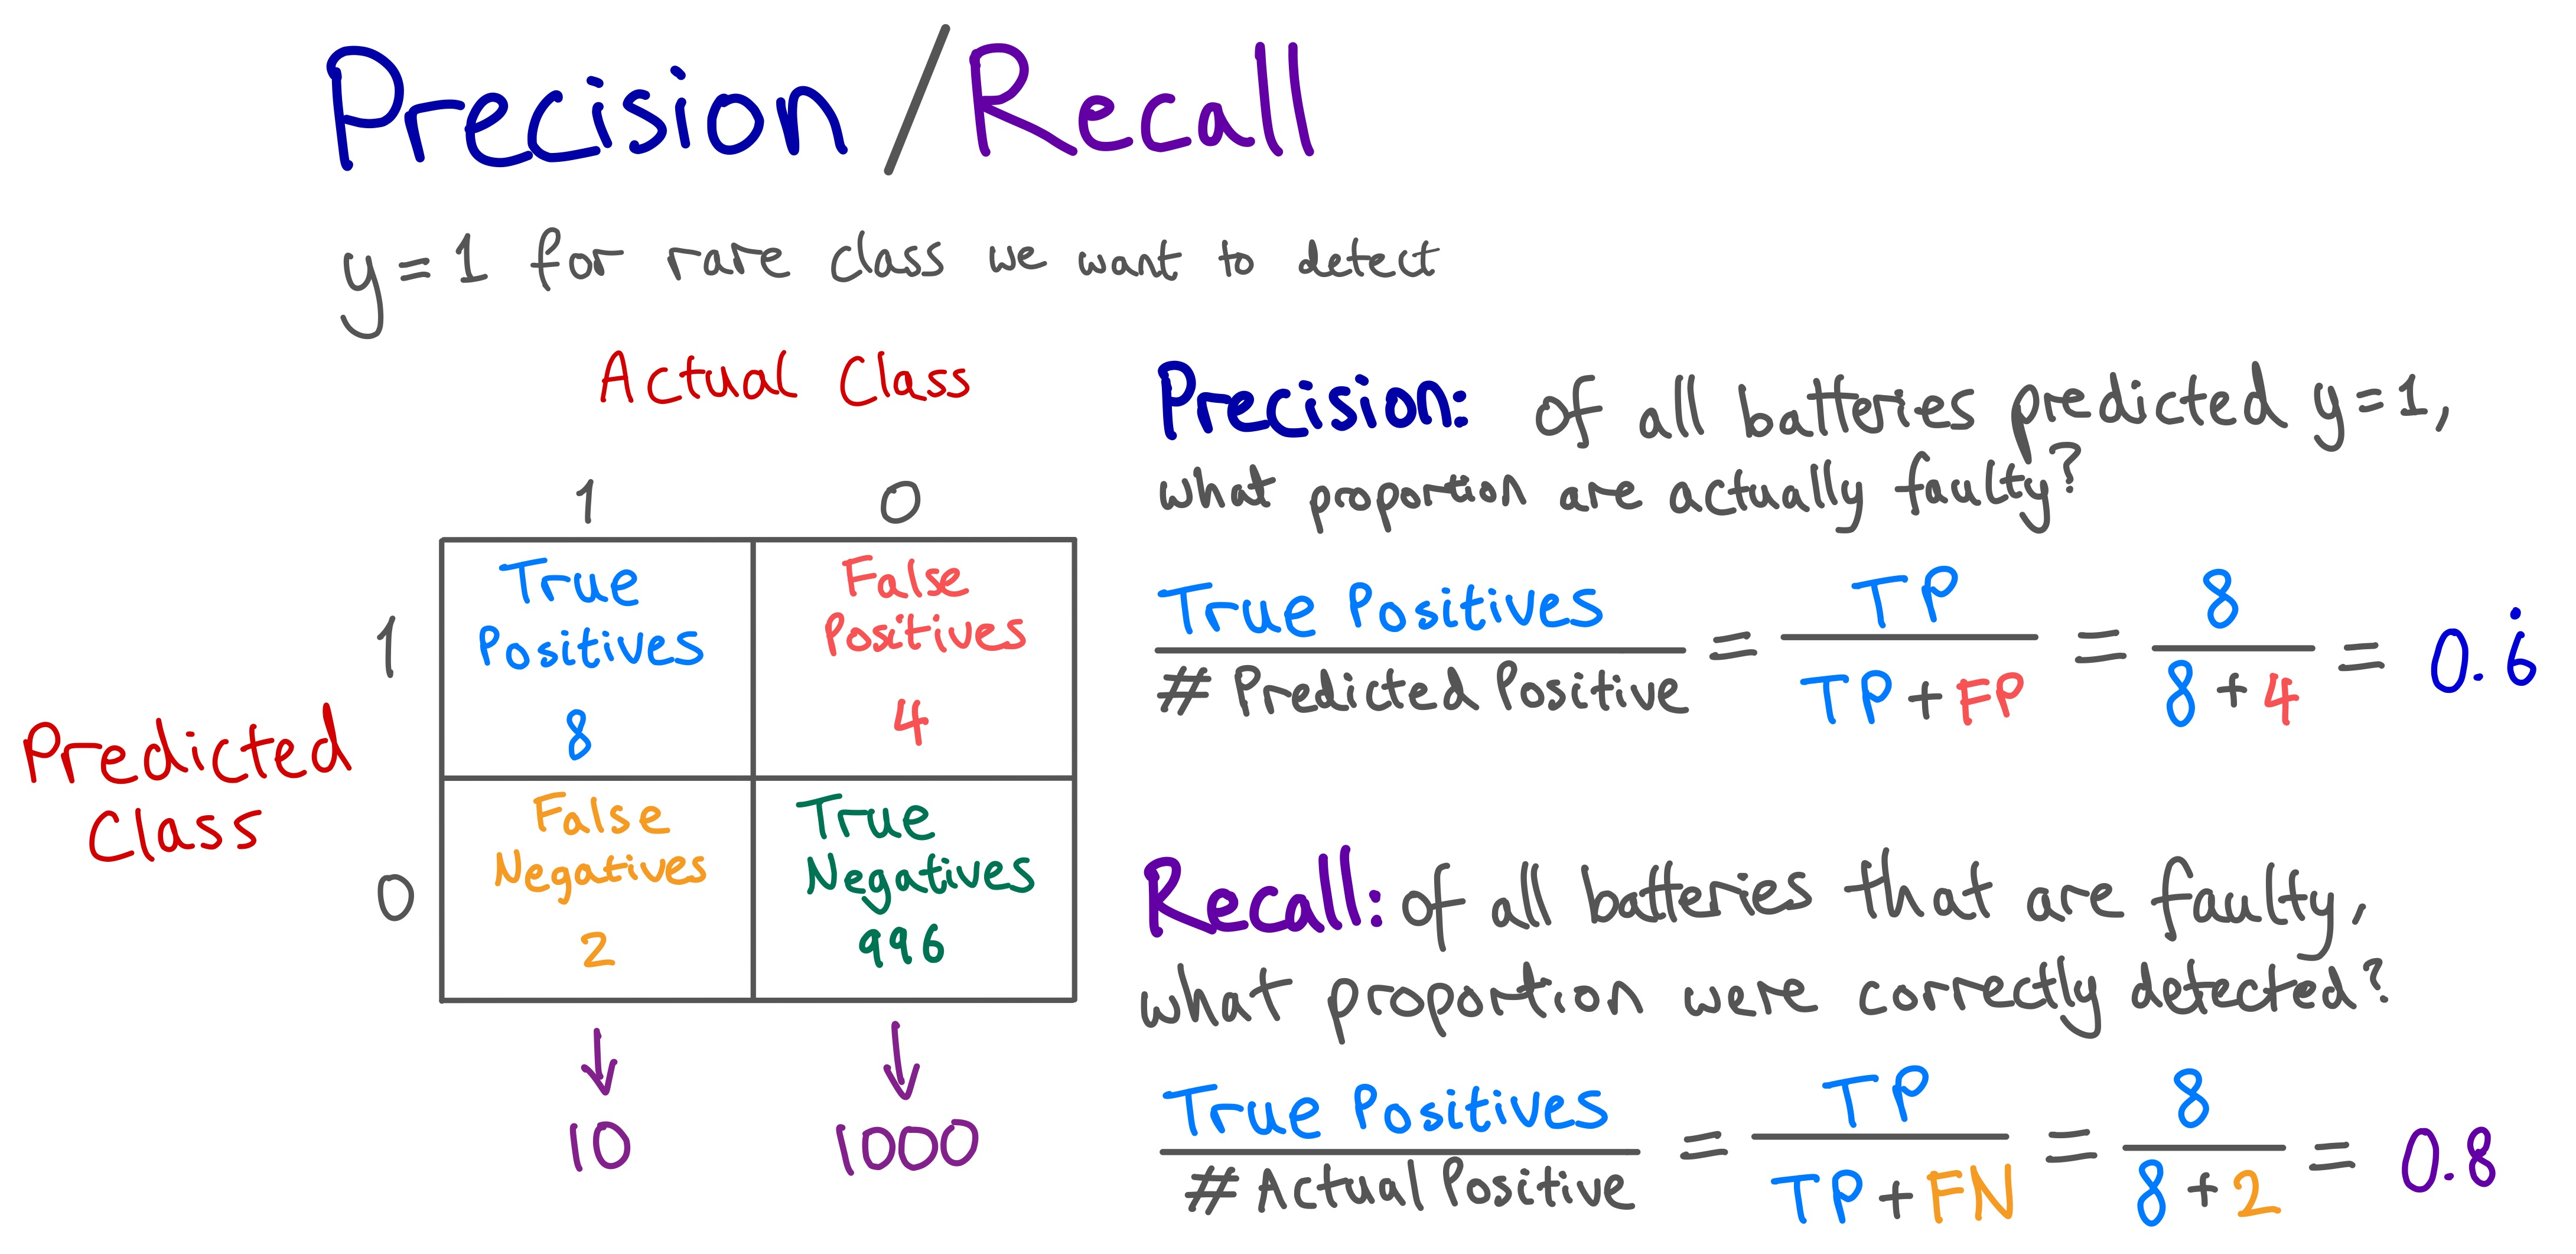 Example of calculating the precision and recall from a confusion matrix. Image by author